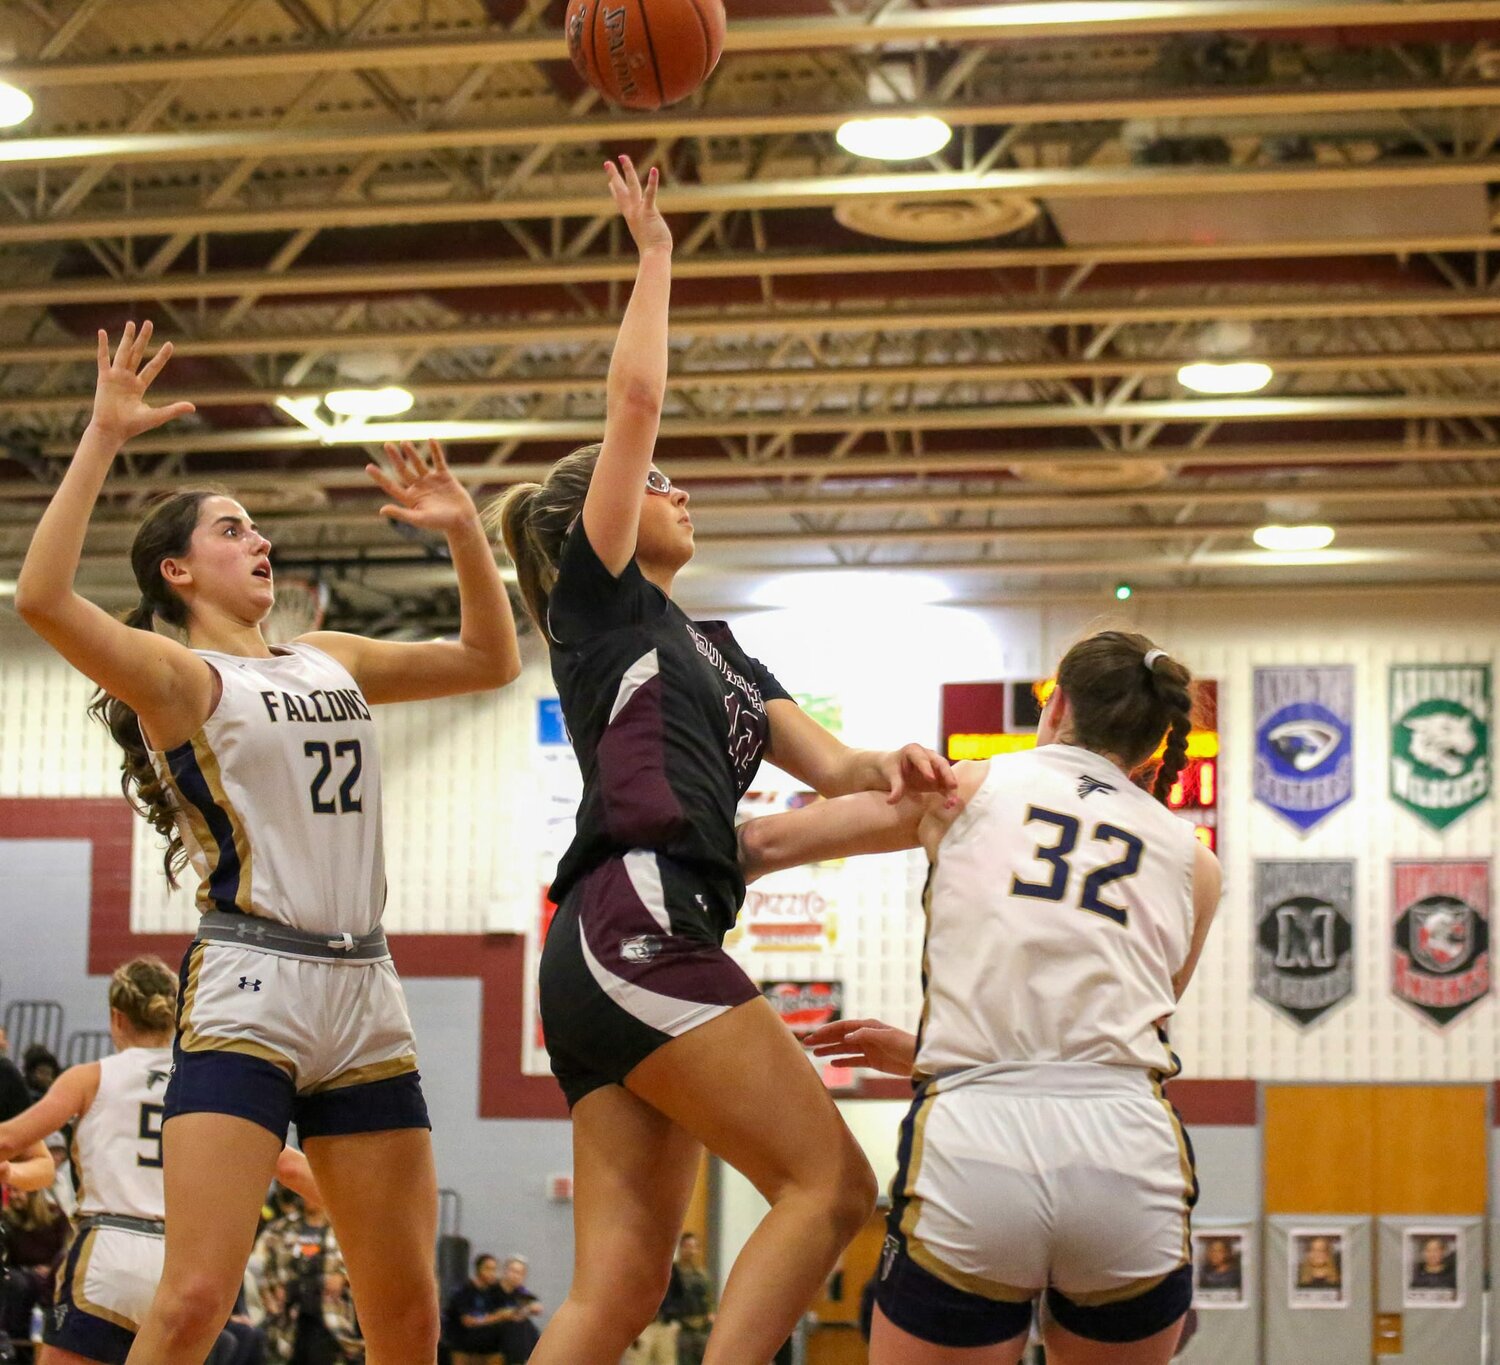 Broadneck’s Mackenzie Wharton (12) attempted a shot over Severna Park’s Charley Coward (22) and Ryn Feemster (32).